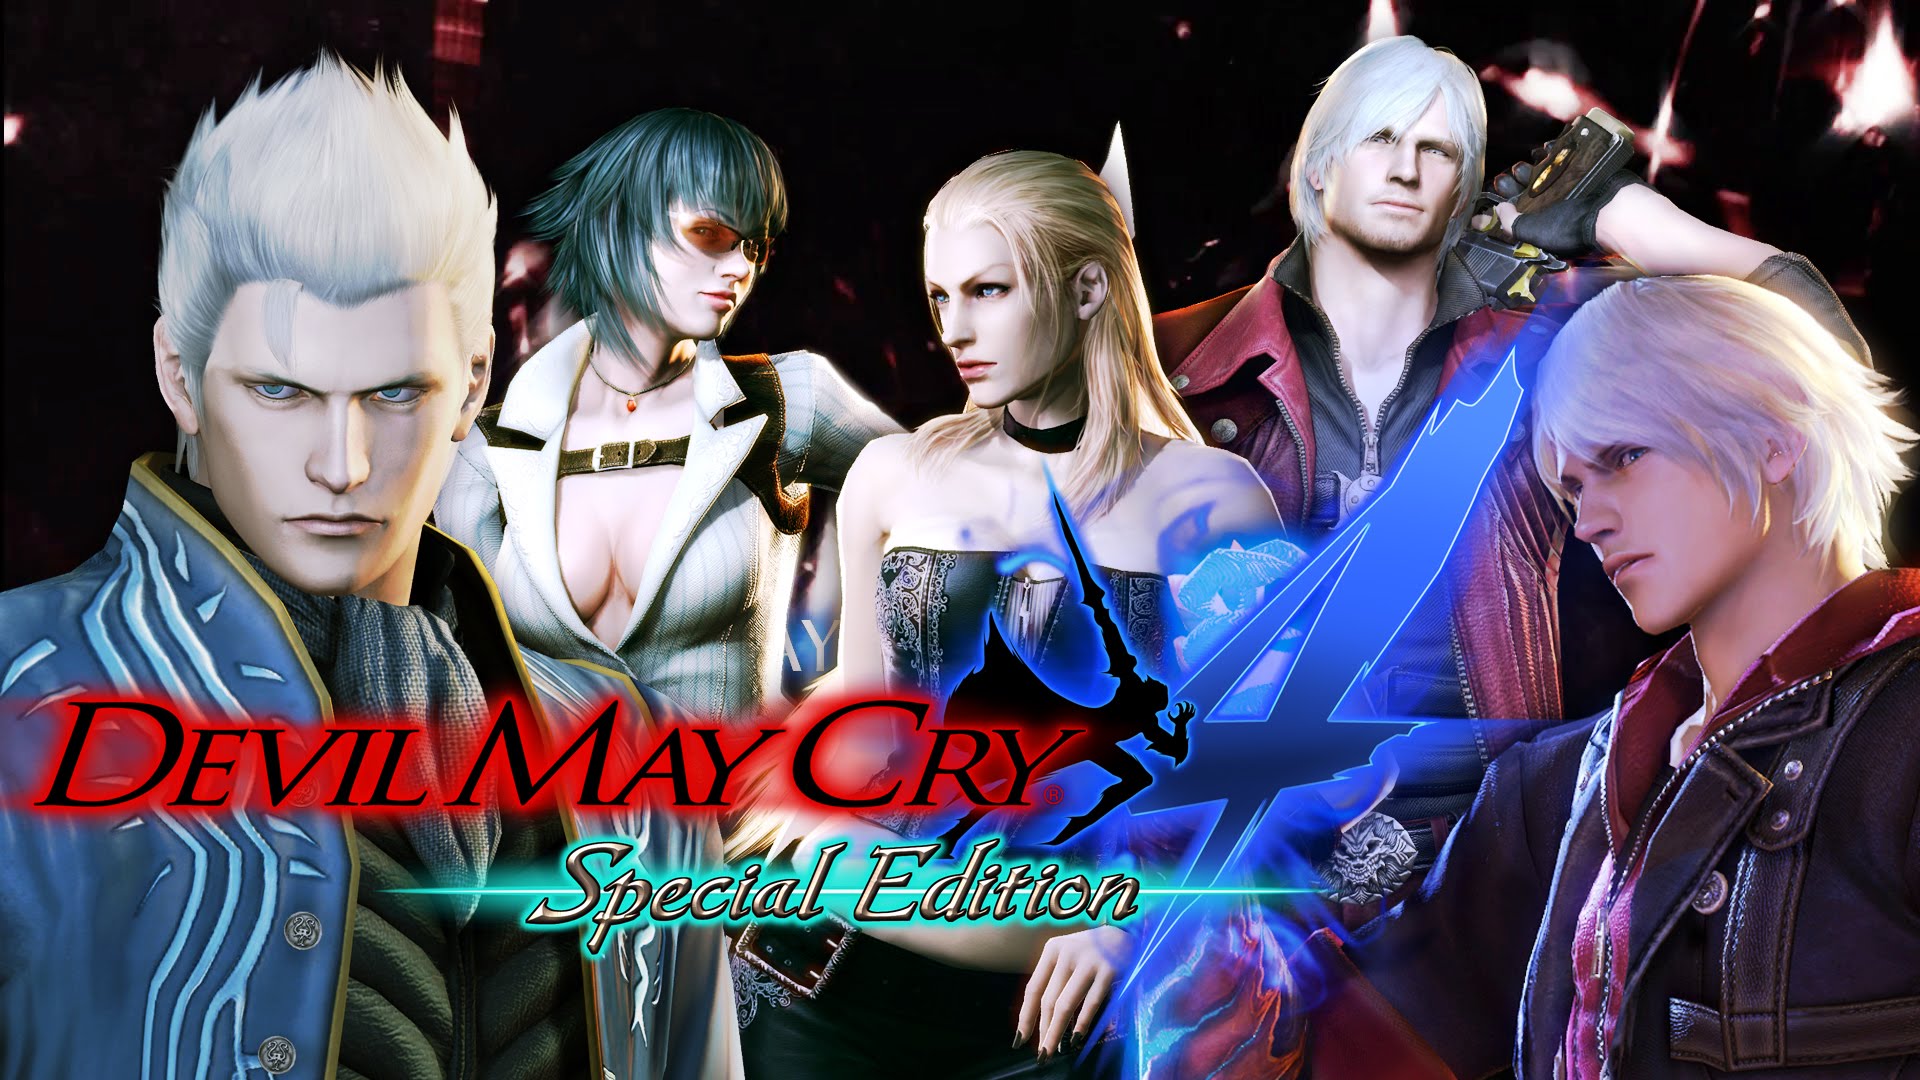 Devil May Cry 4 Special Edition Coming June 23Video Game News